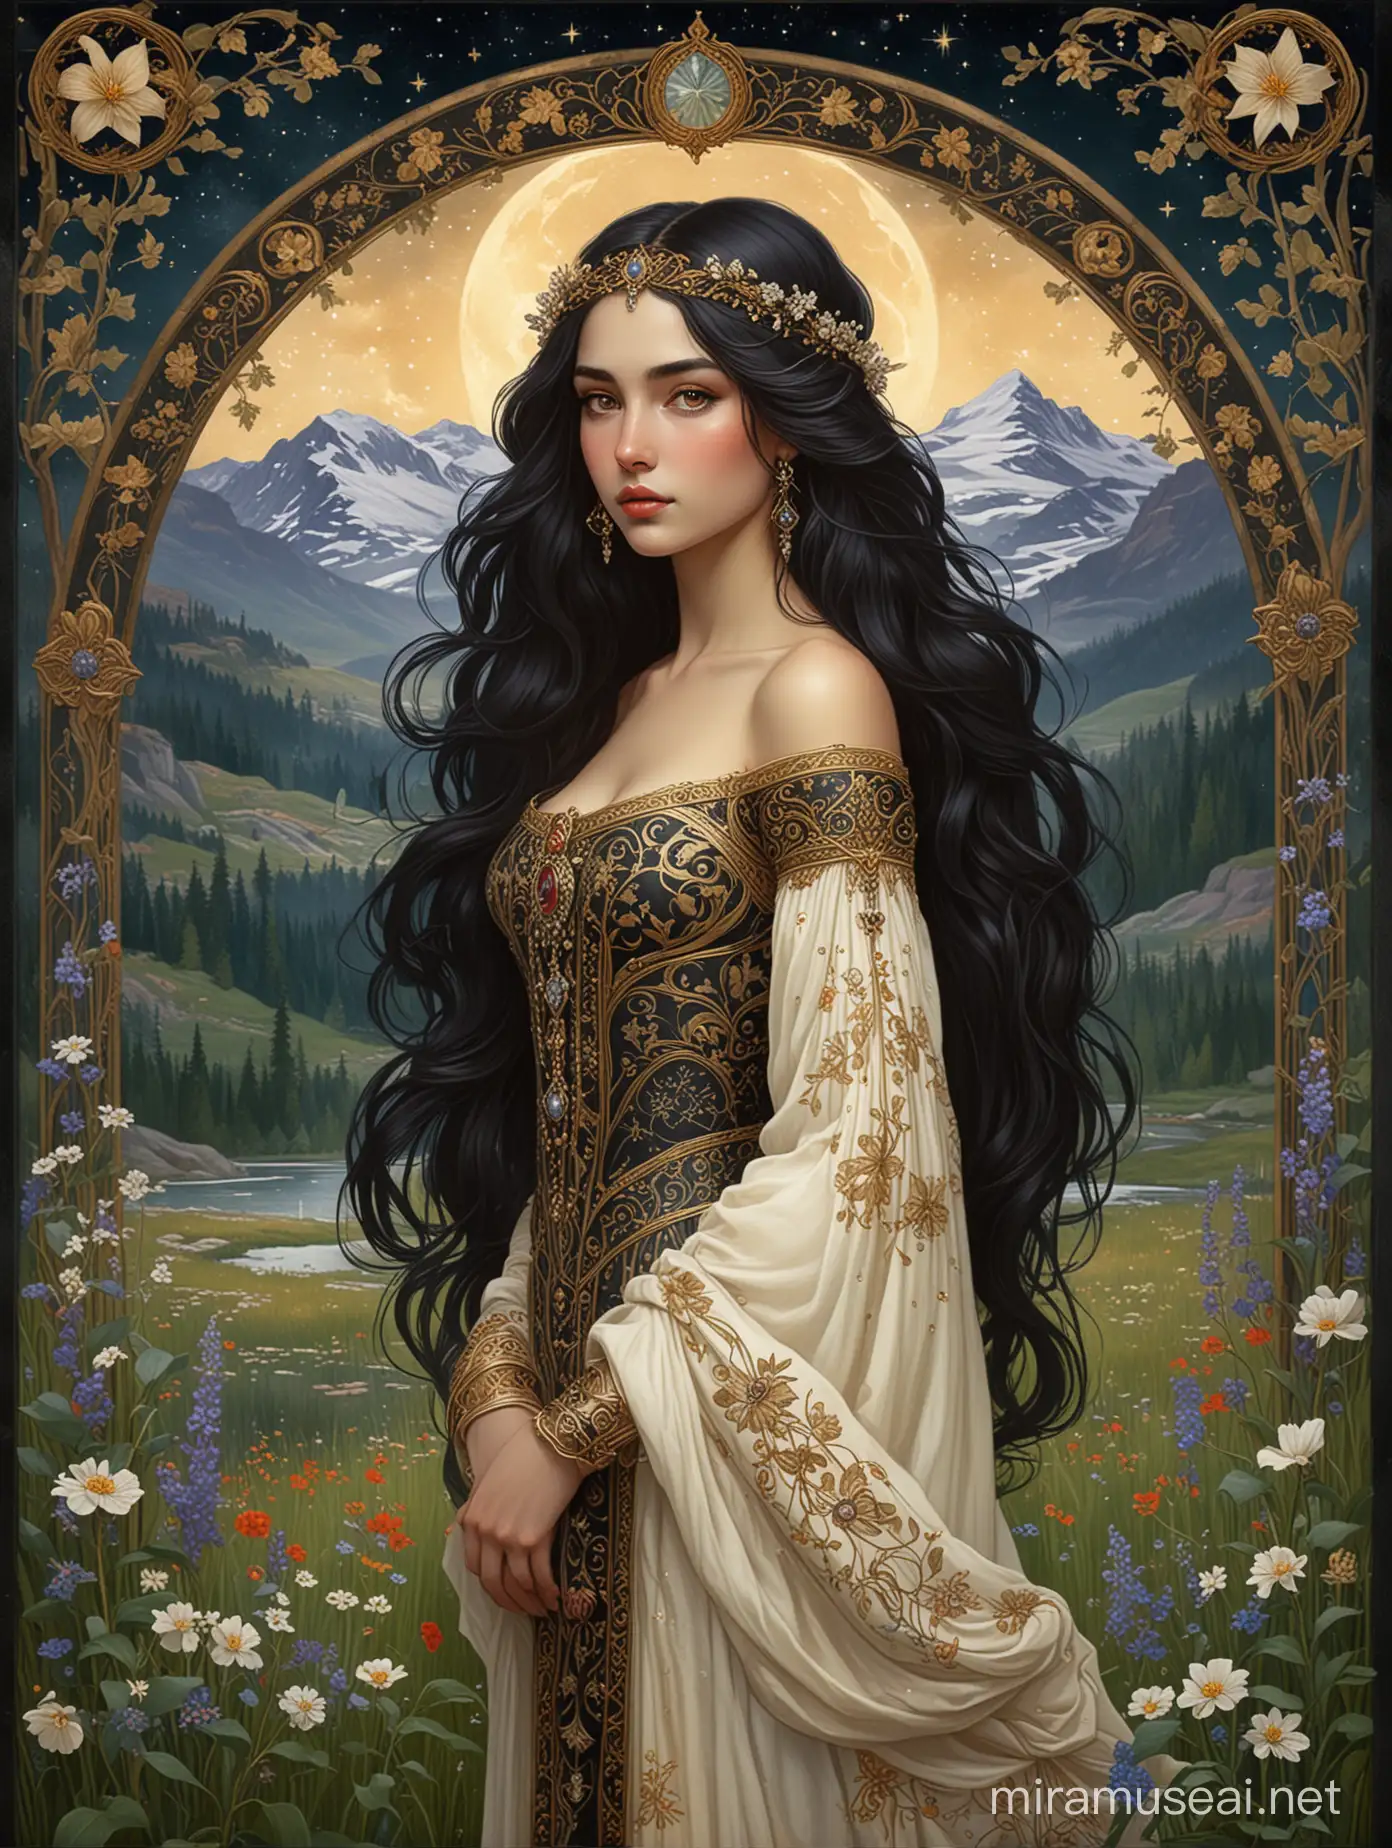 Medieval Princess with Lustrous Hair in Enchanted Birch Grove at Night